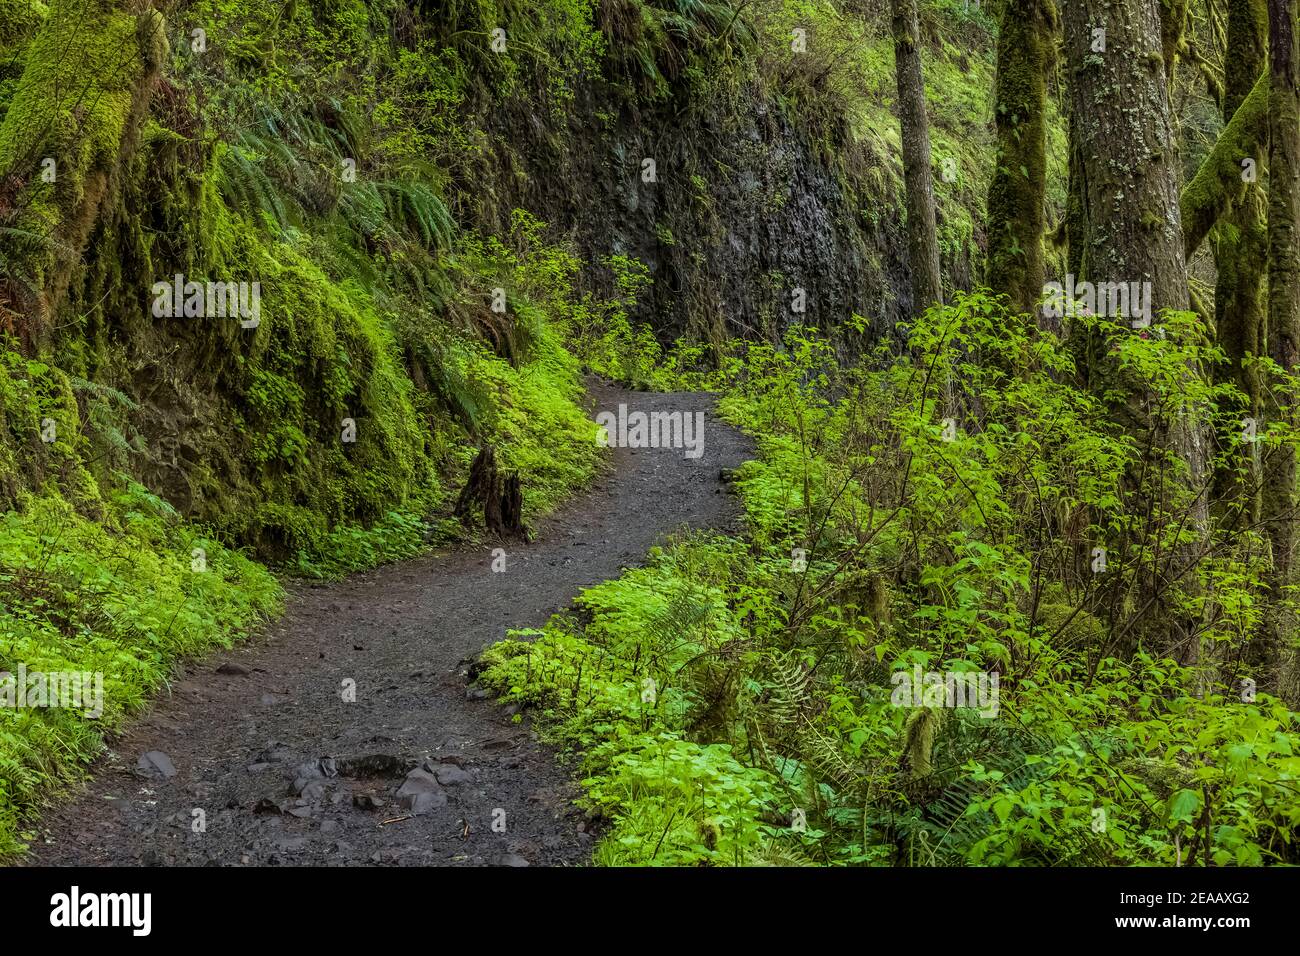 Trail through the rich green forest of Silver Falls State Park, Oregon, USA Stock Photo